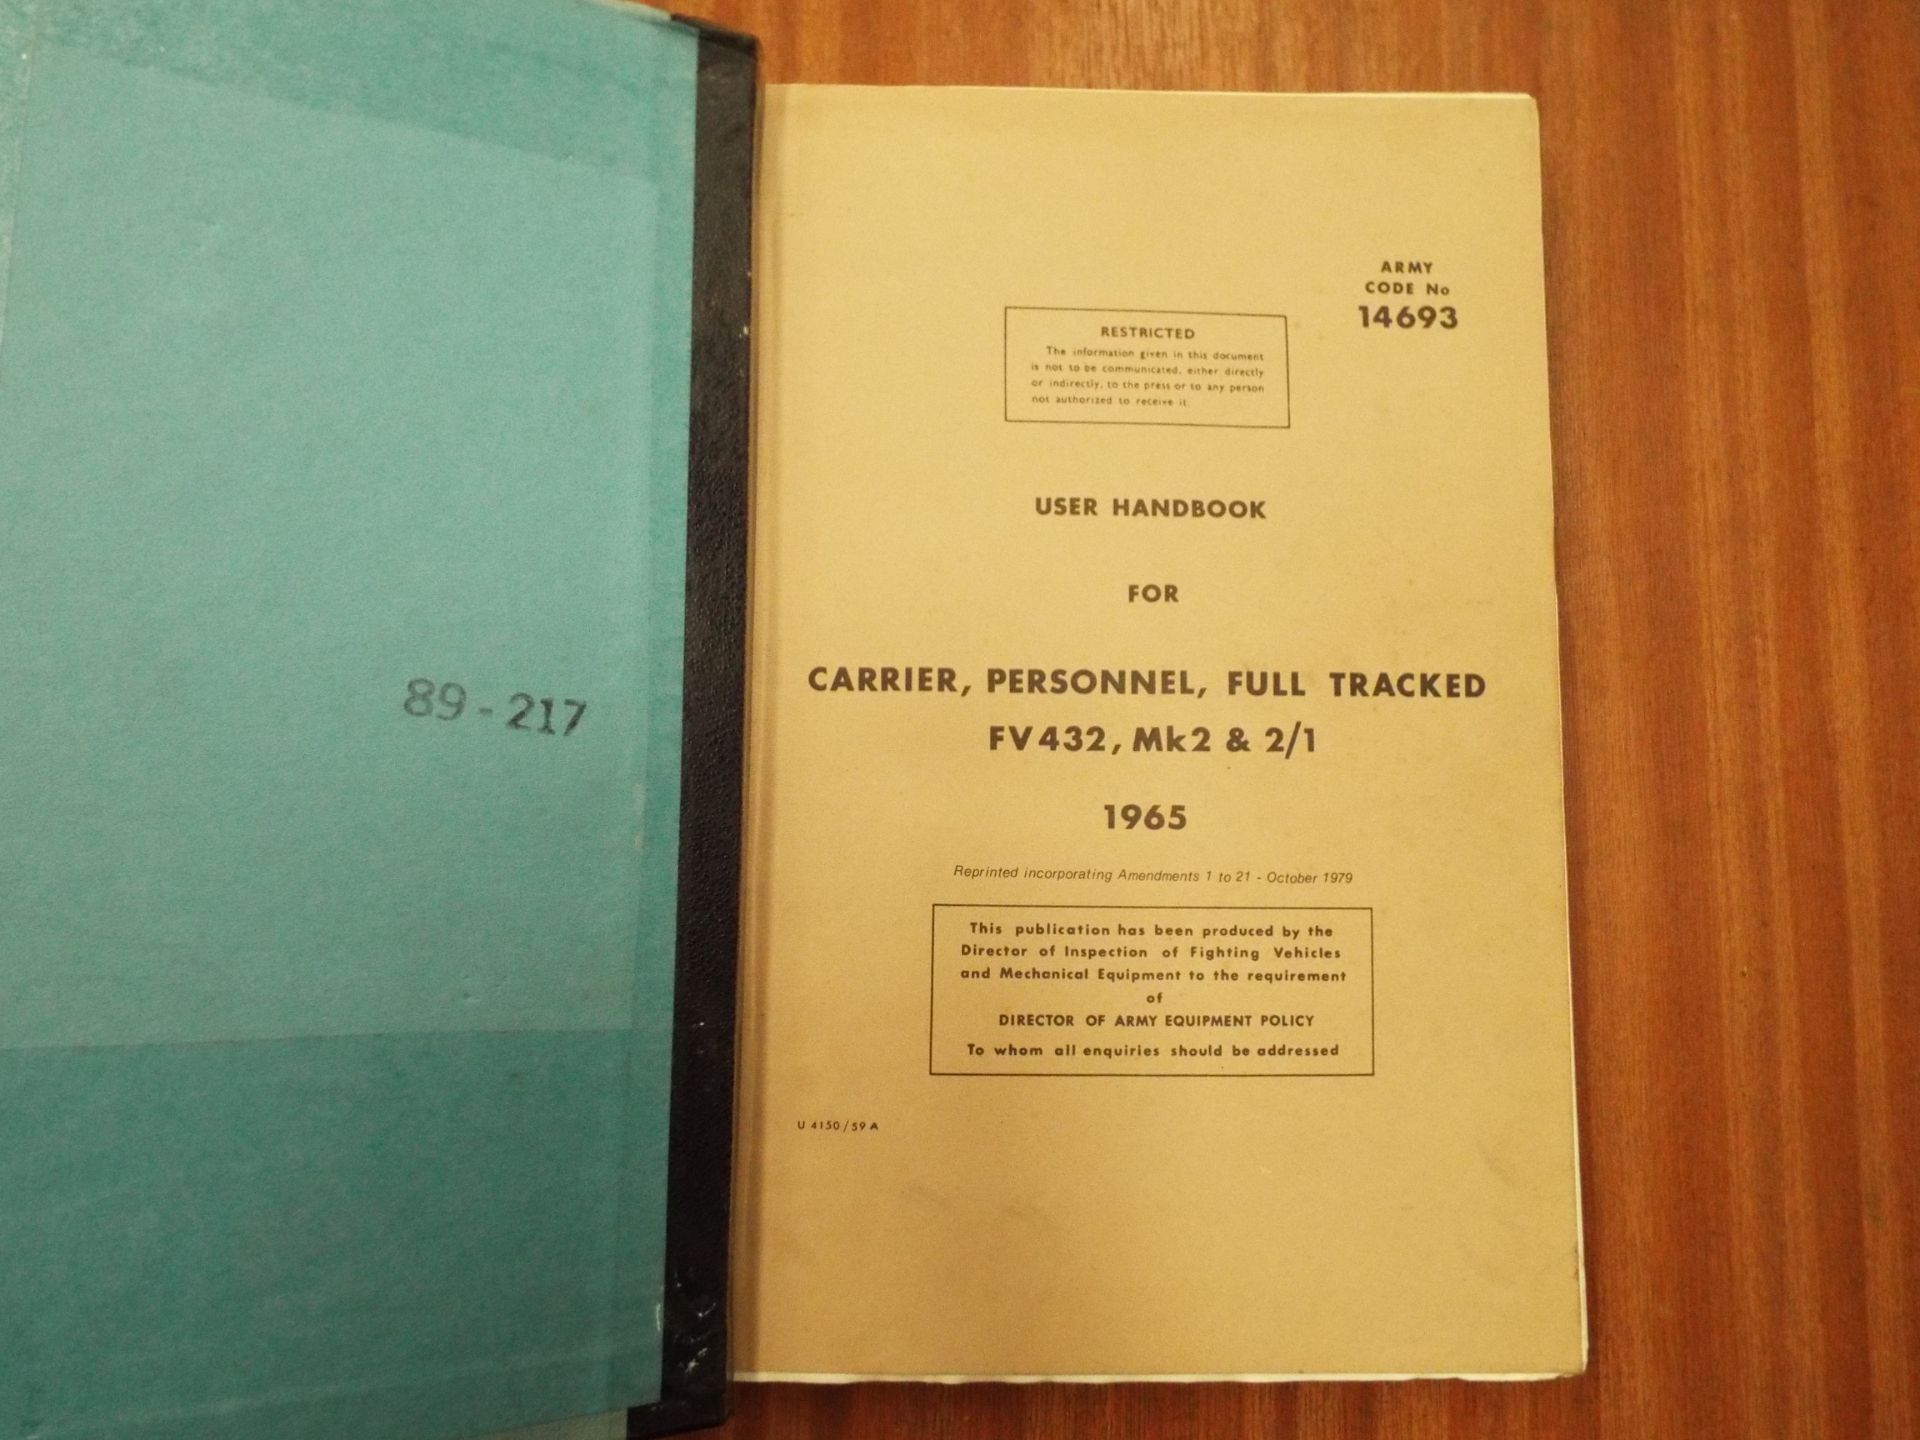 Extremely Rare 1965 FV432 User Handbook Complete with Variant Supplements